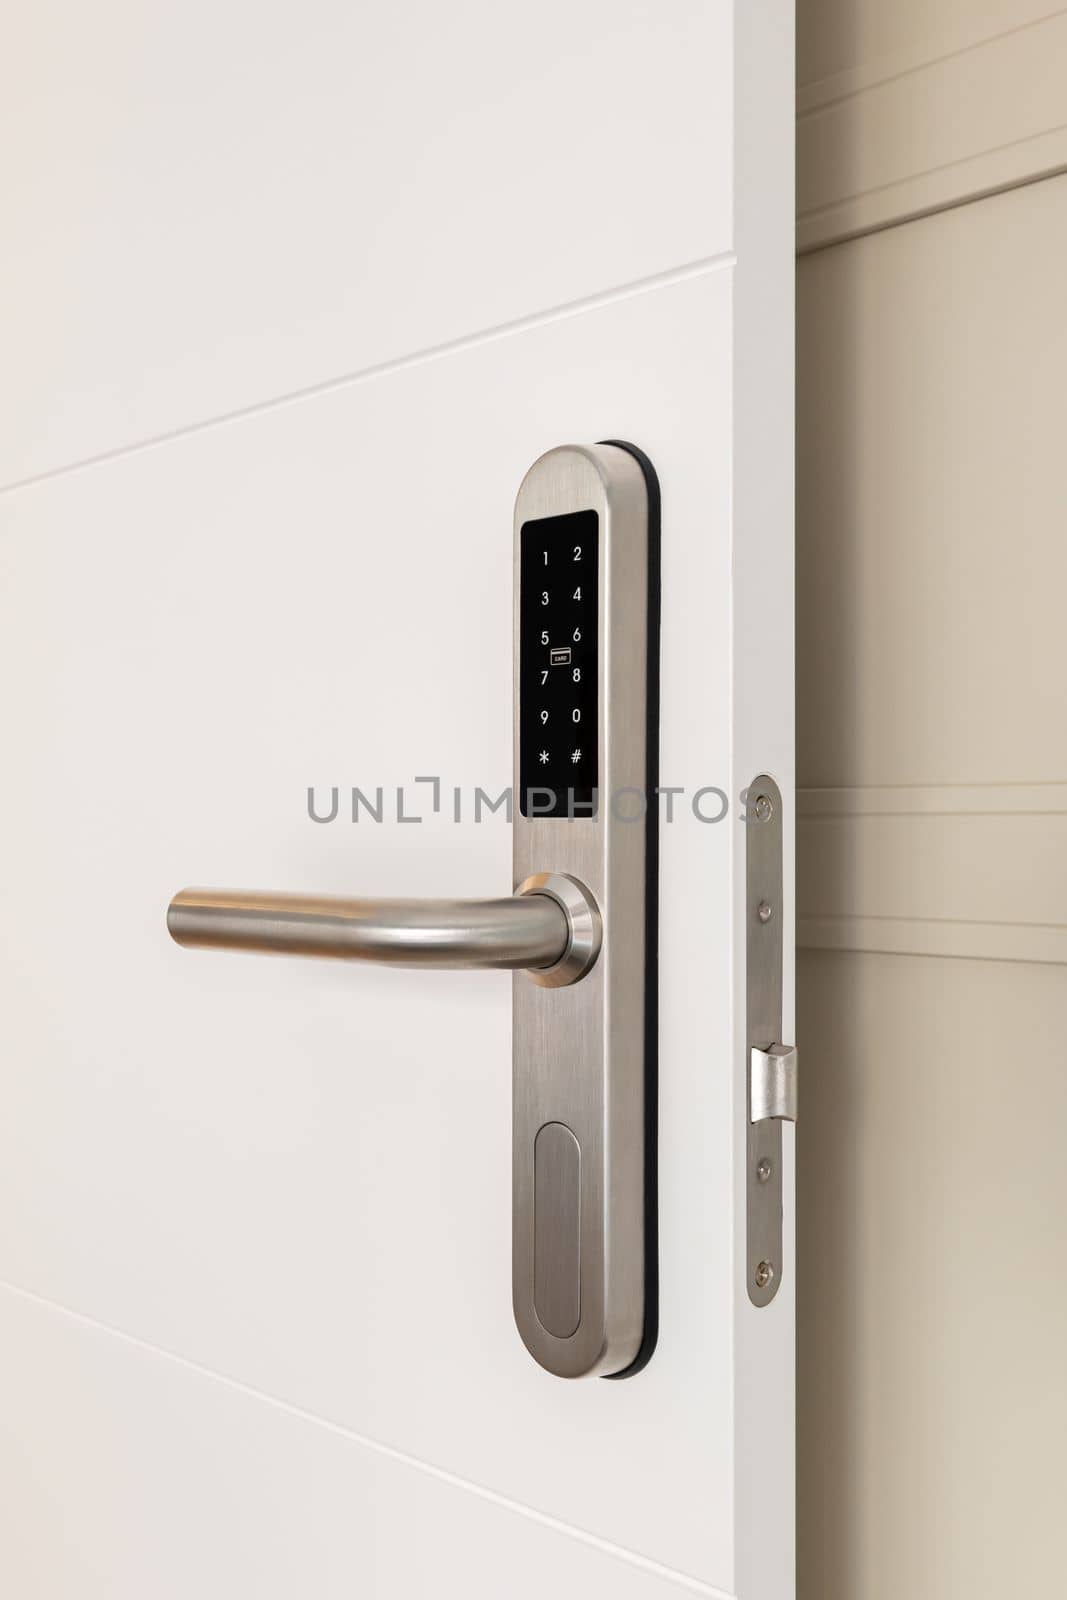 Entrance white wooden door with an electronic lock for the security of the apartment. On the lock there are buttons with numbers for entering the code. Chrome metal lock